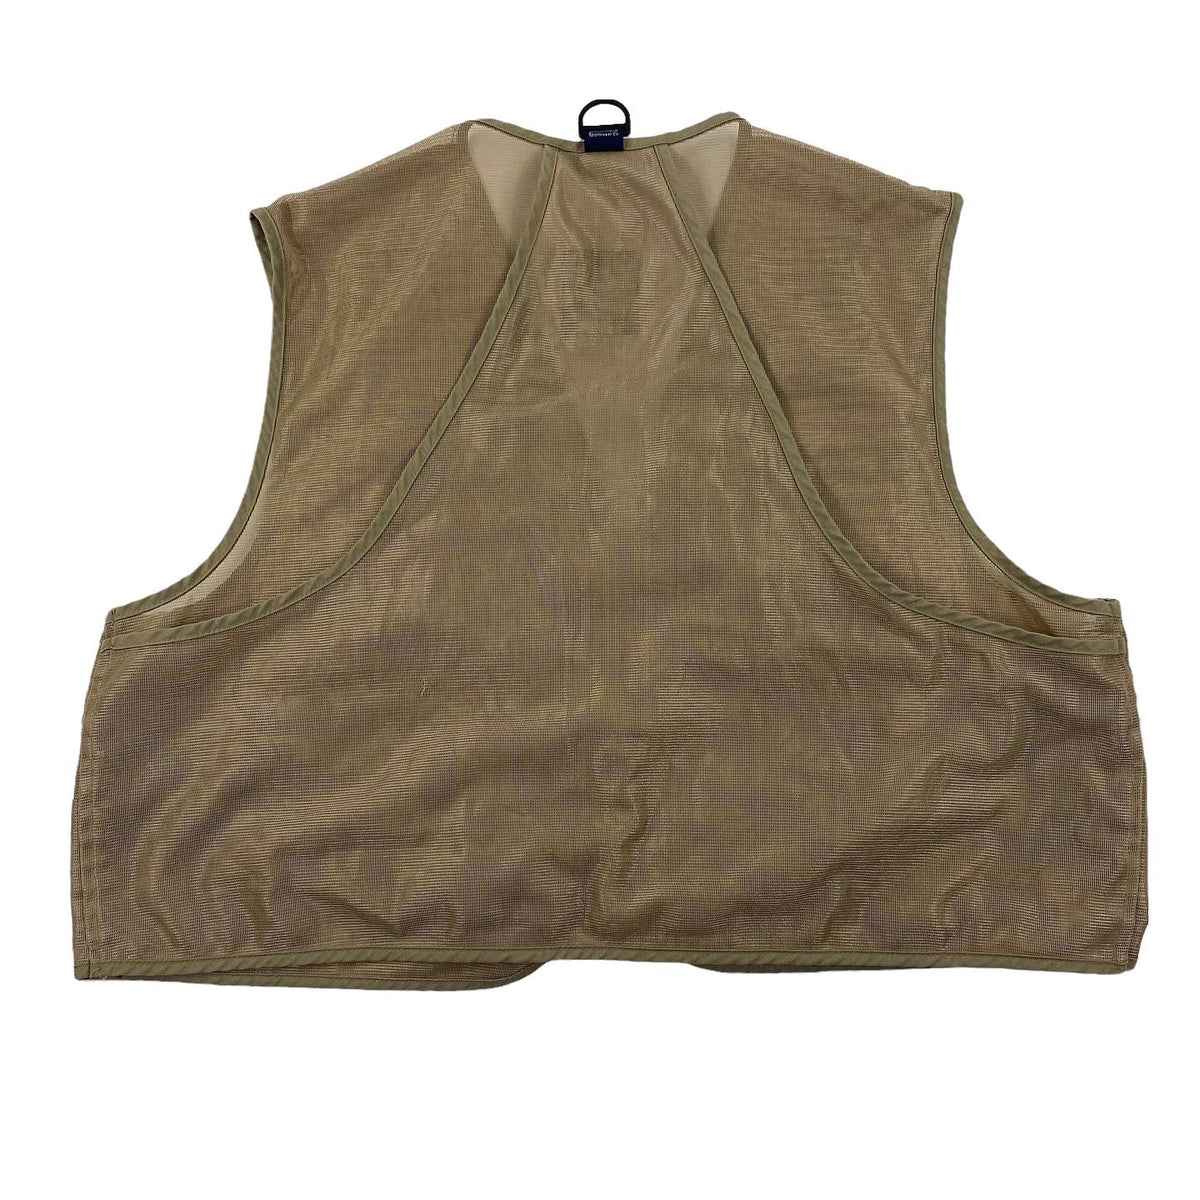 Item 850886 - Columbia Fishing vest - Fly Packs - Size M